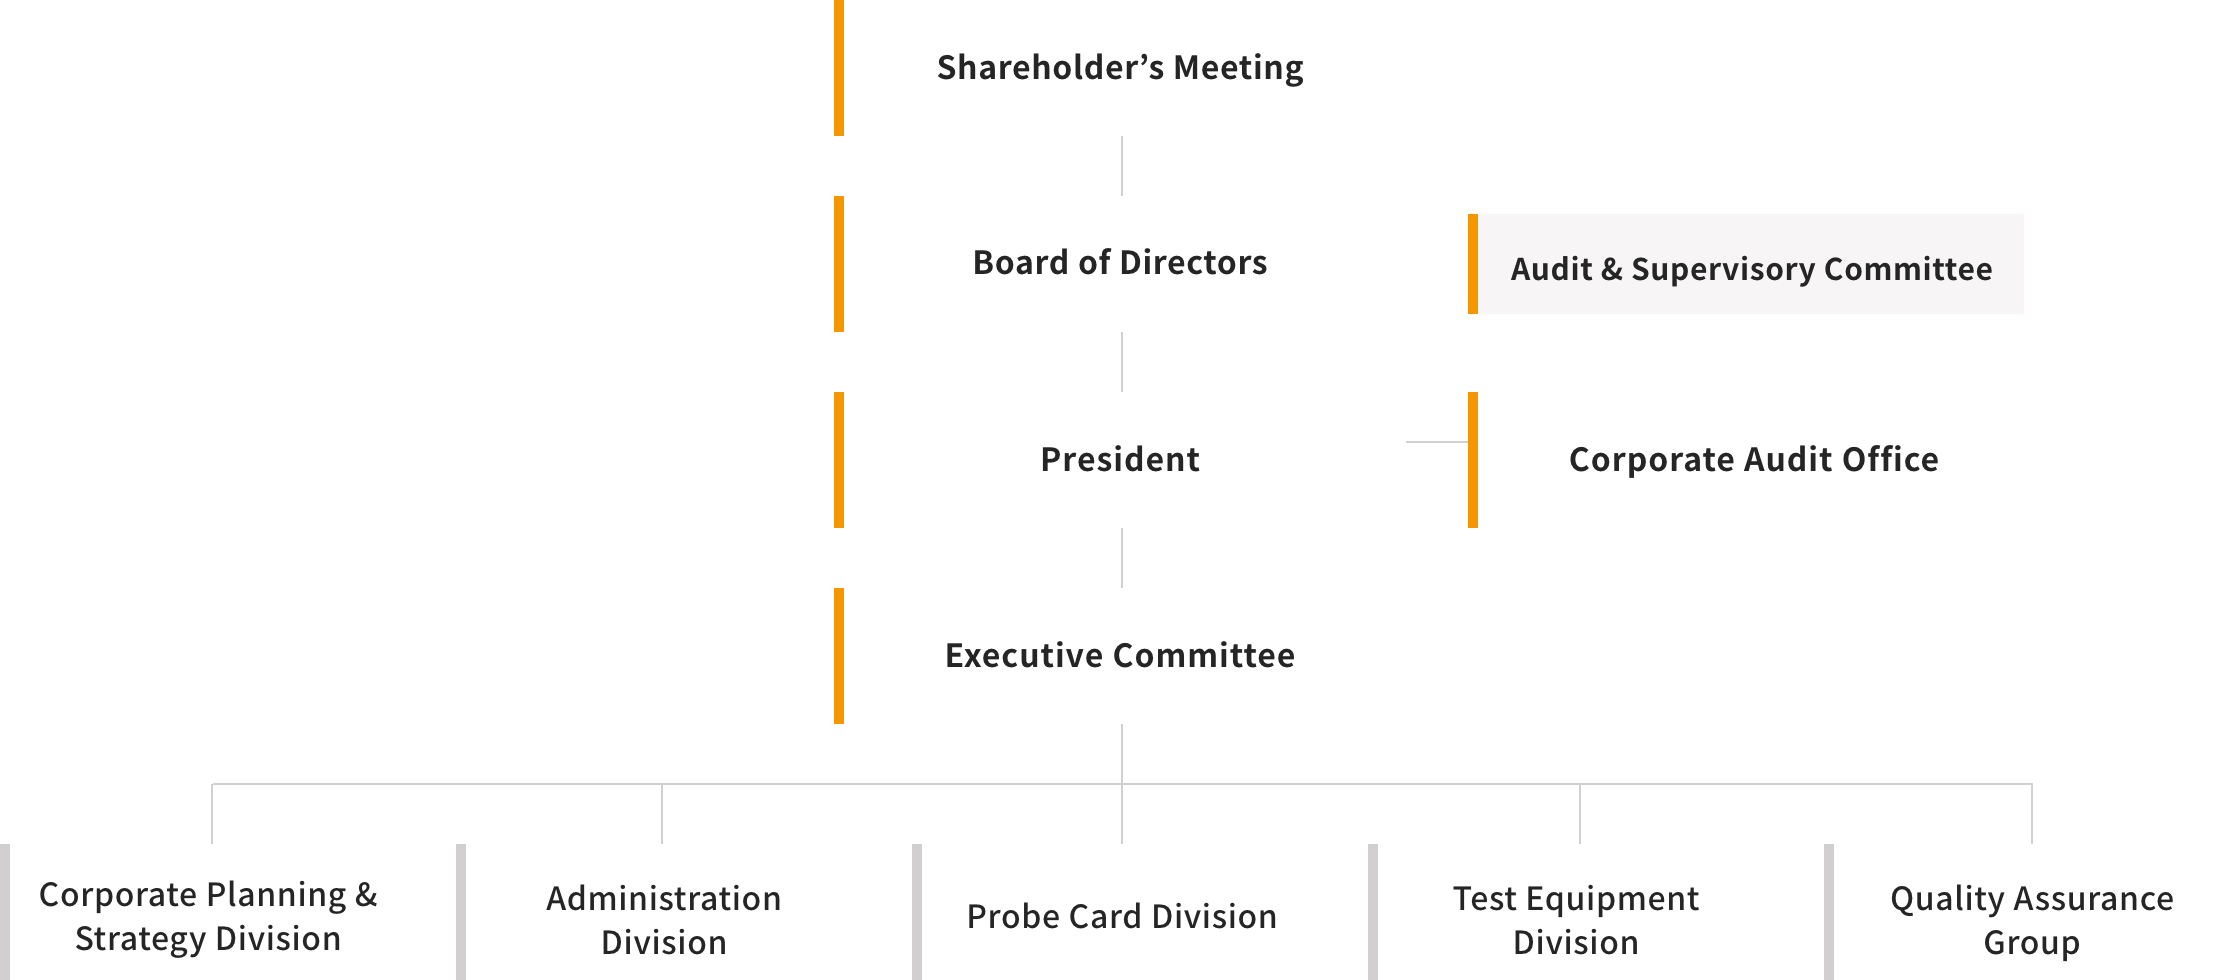 Shareholder's Meeting - Board of Directors (Audit & Supervisory Committee) - President / Corporate Audit Office - Executive Committee - Corporate Planning & Strategy Division / Administration Division / Probe Card Division / Test Equipment Division / Quality Assurance Group